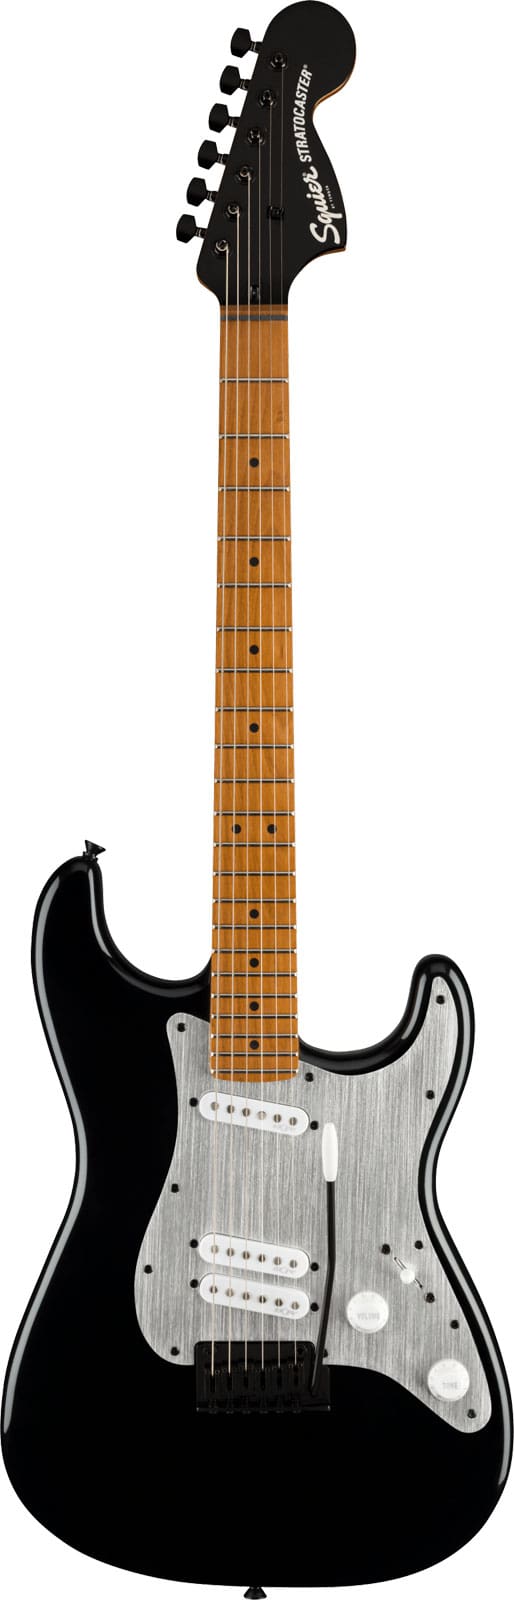 SQUIER CONTEMPORARY STRATOCASTER SPECIAL, ROASTED MN, SILVER ANODIZED PICKGUARD, BLACK